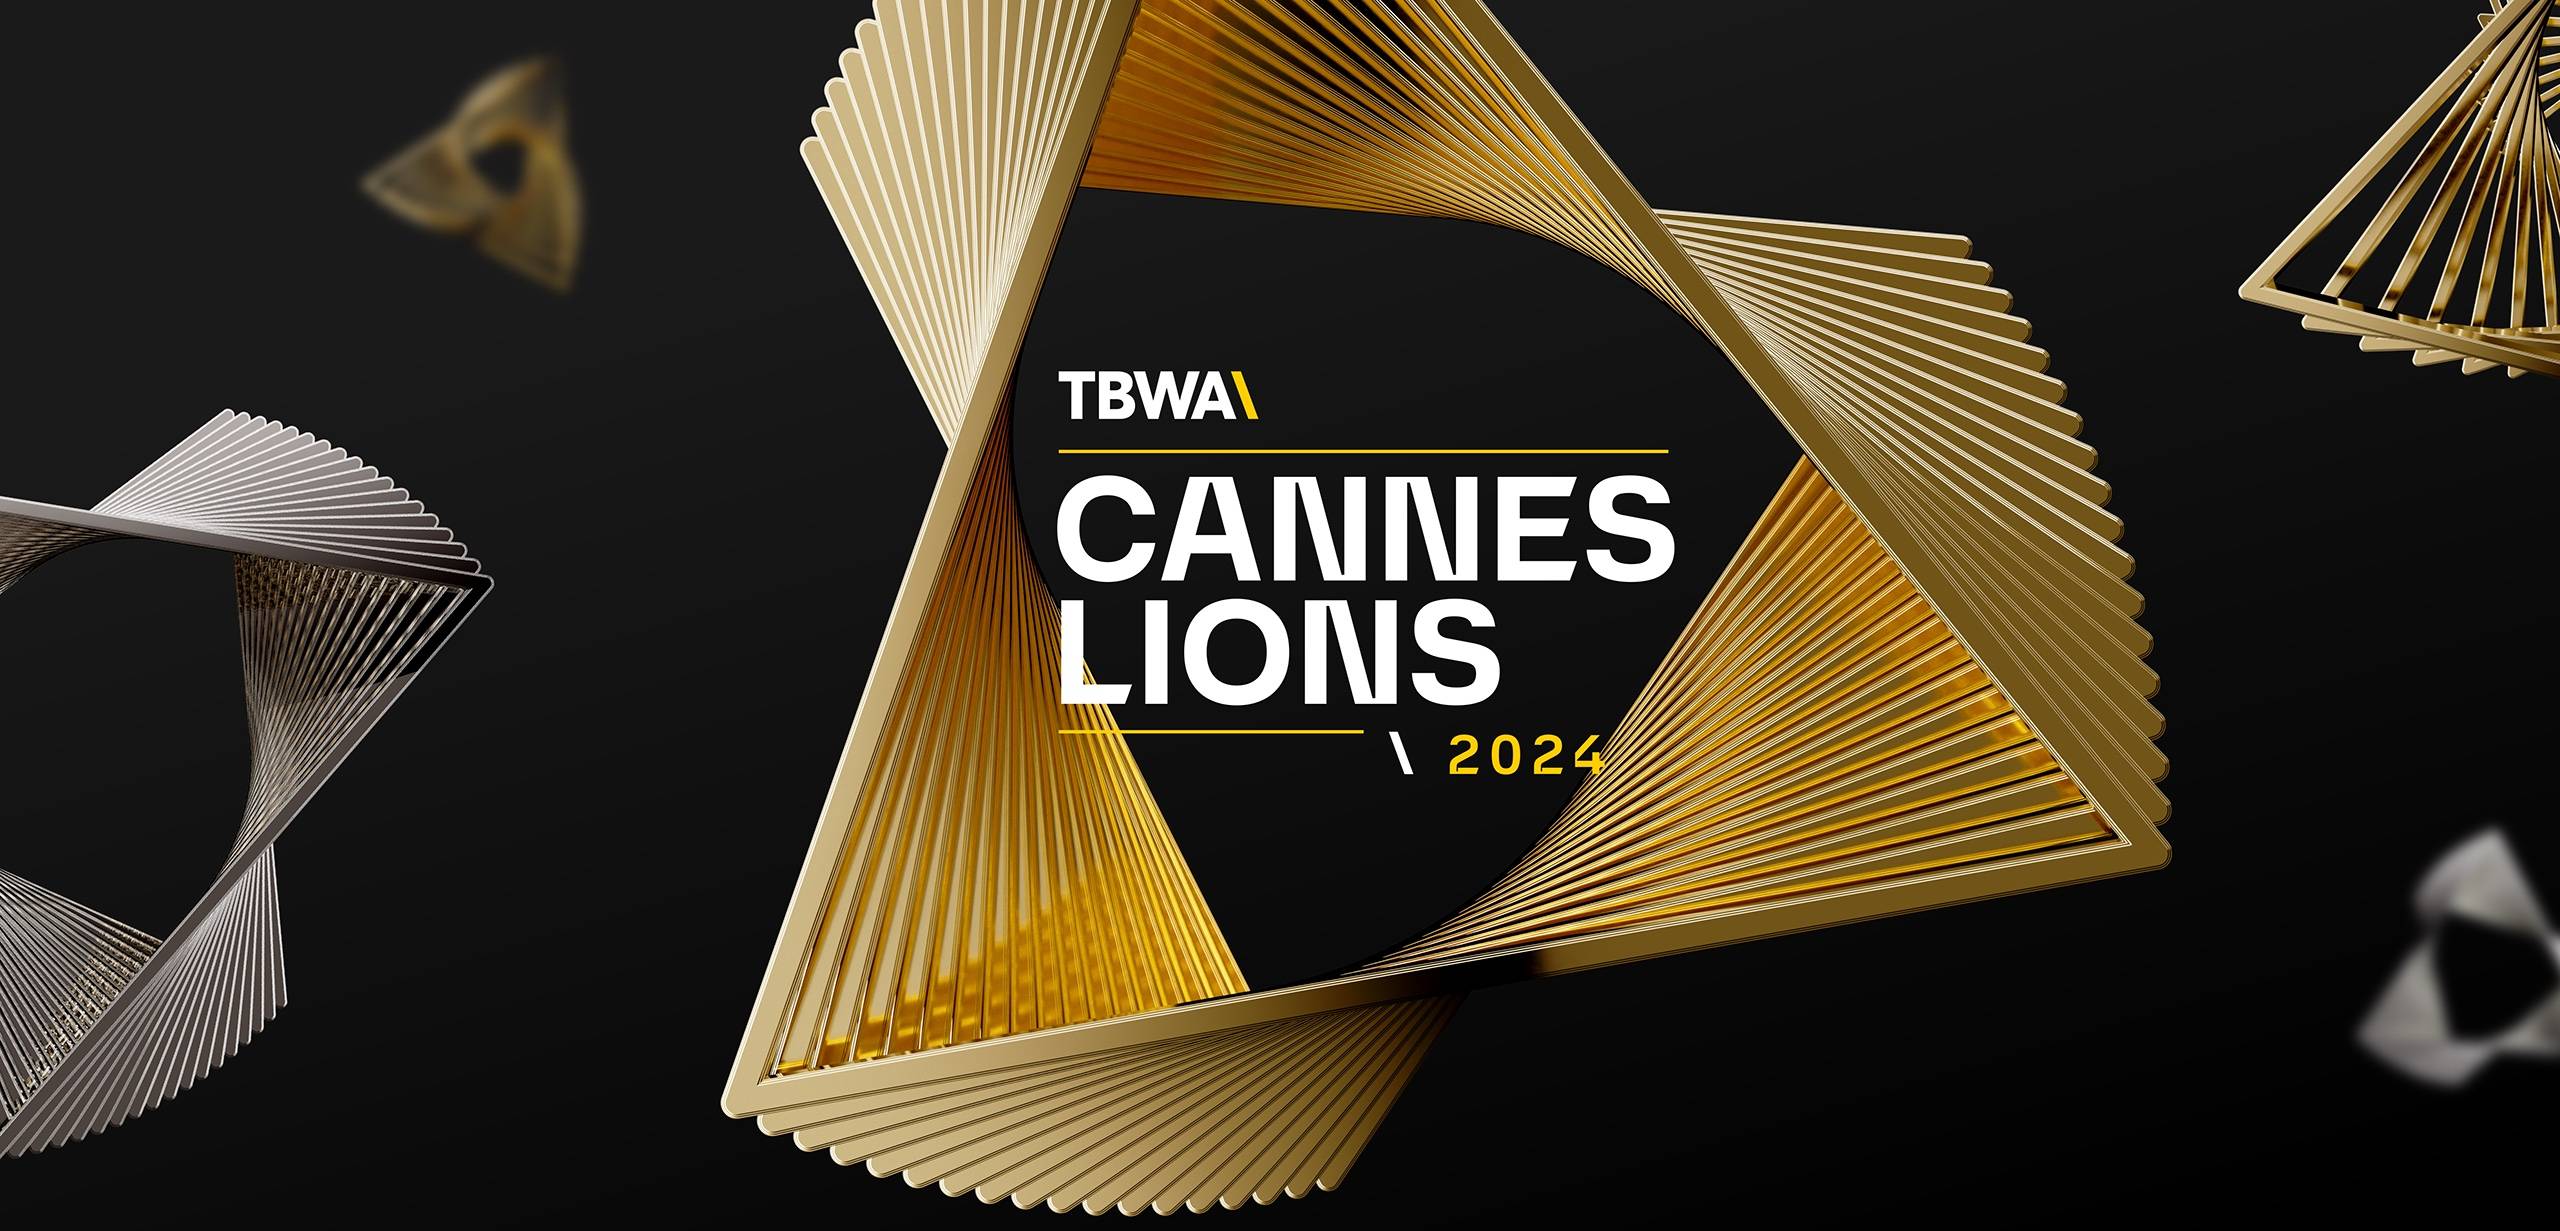 TBWA at Cannes Lions 2024